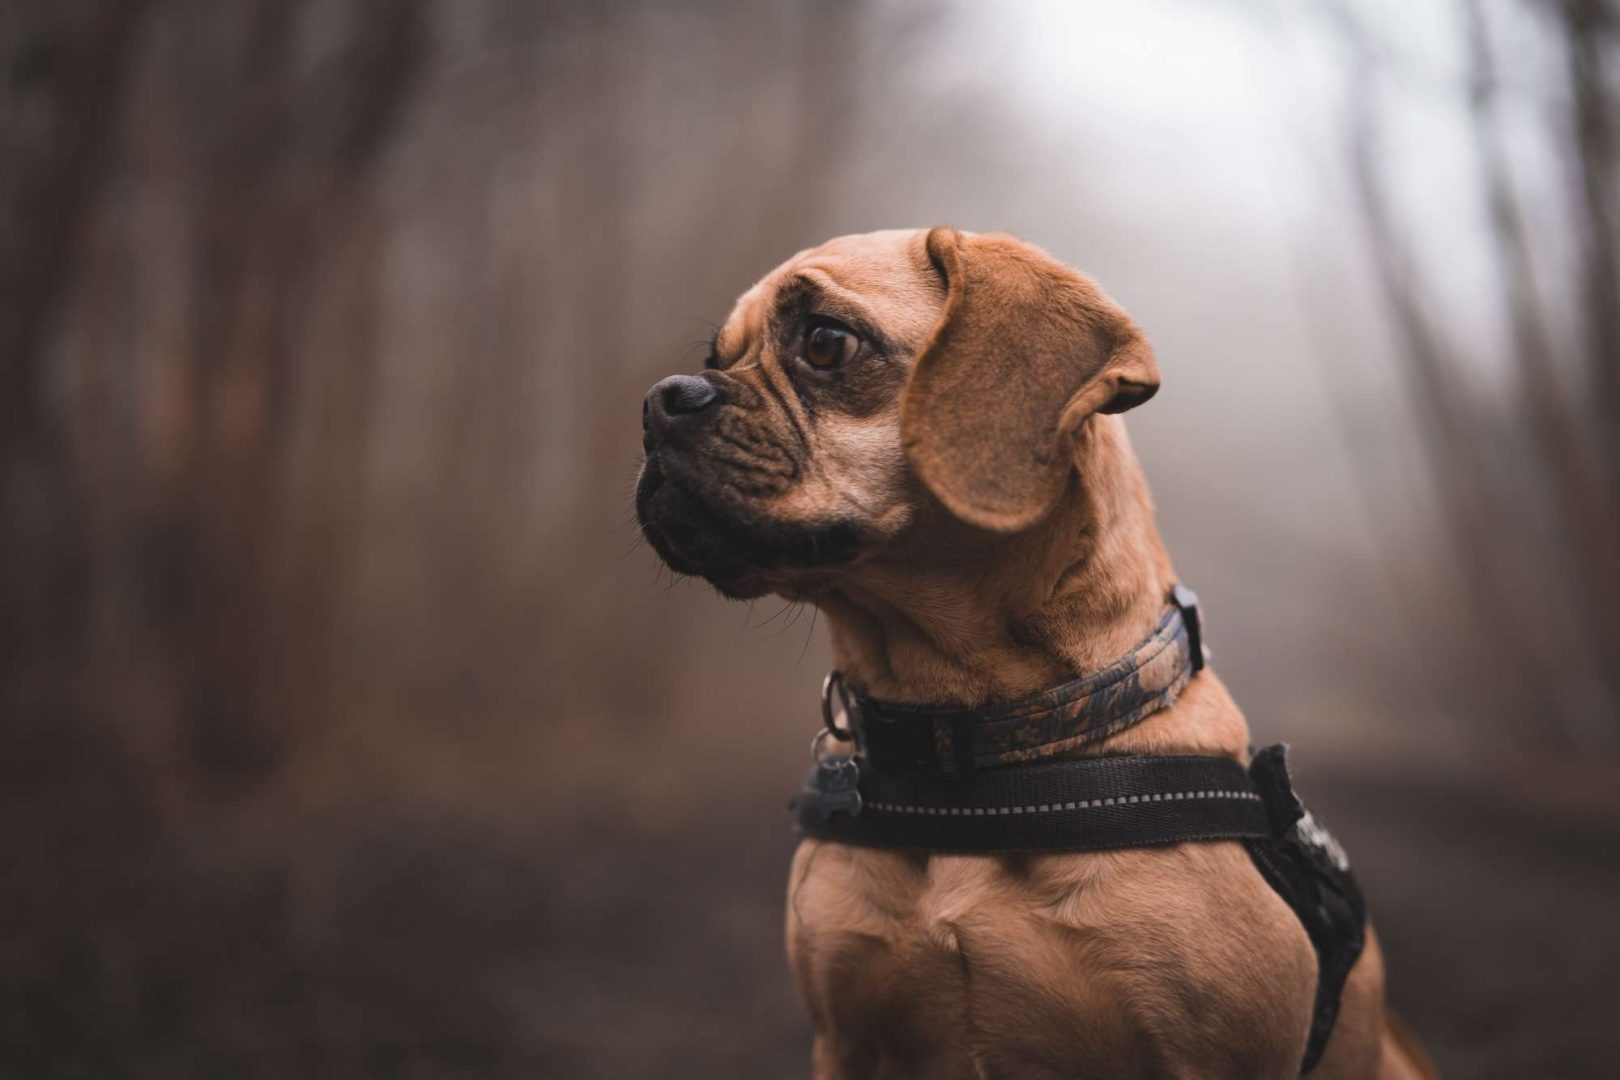 Puggles have wagging tails and can help you promote a friendly nature.